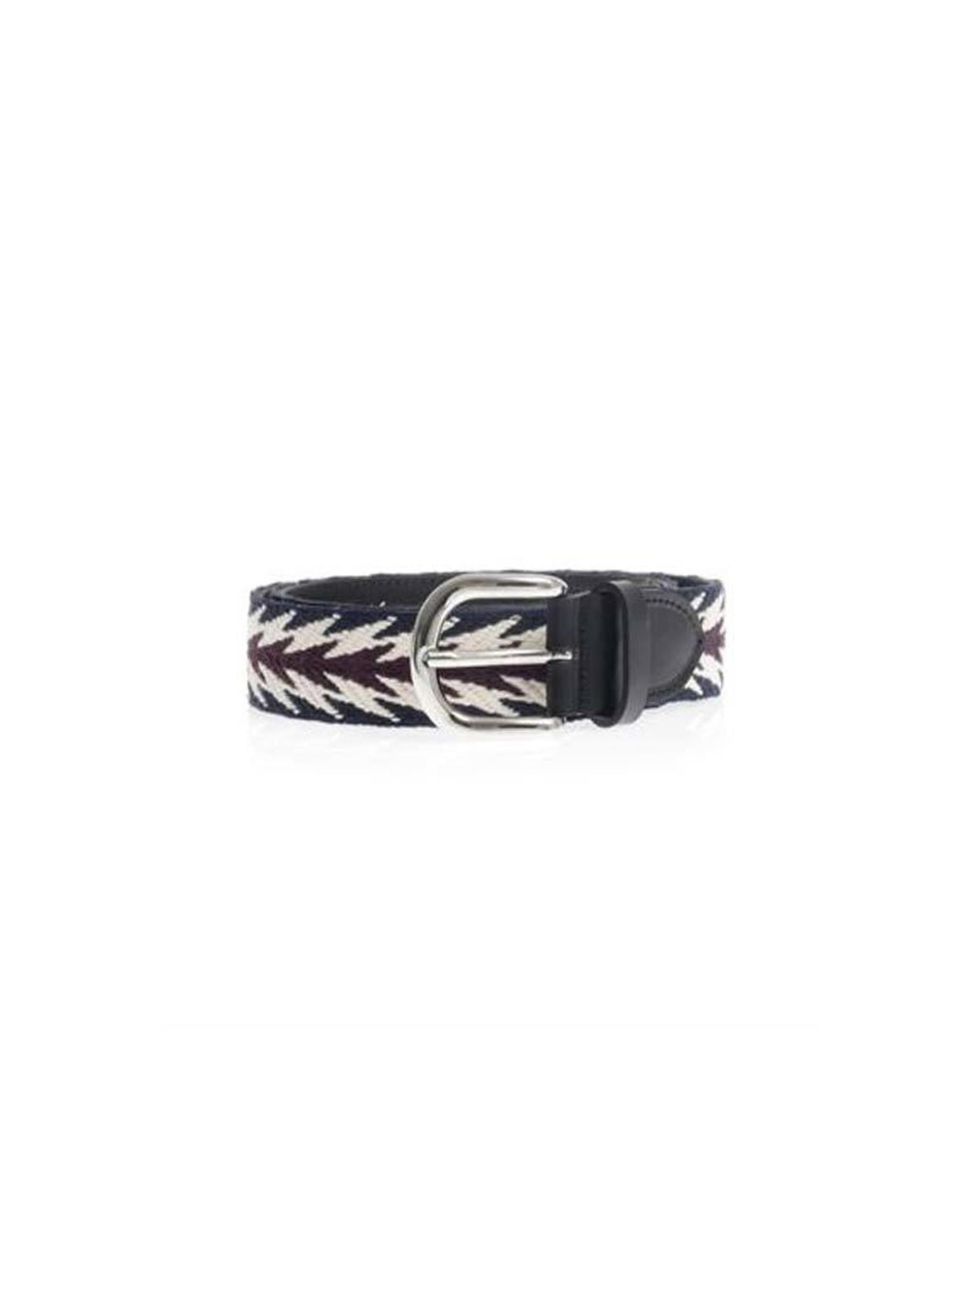 <p>Pair your jeans with a Navajo style belt like this</p><p>Isabel Marant, £105 available at <a href="http://www.matchesfashion.com/product/180506">Matches</a></p>